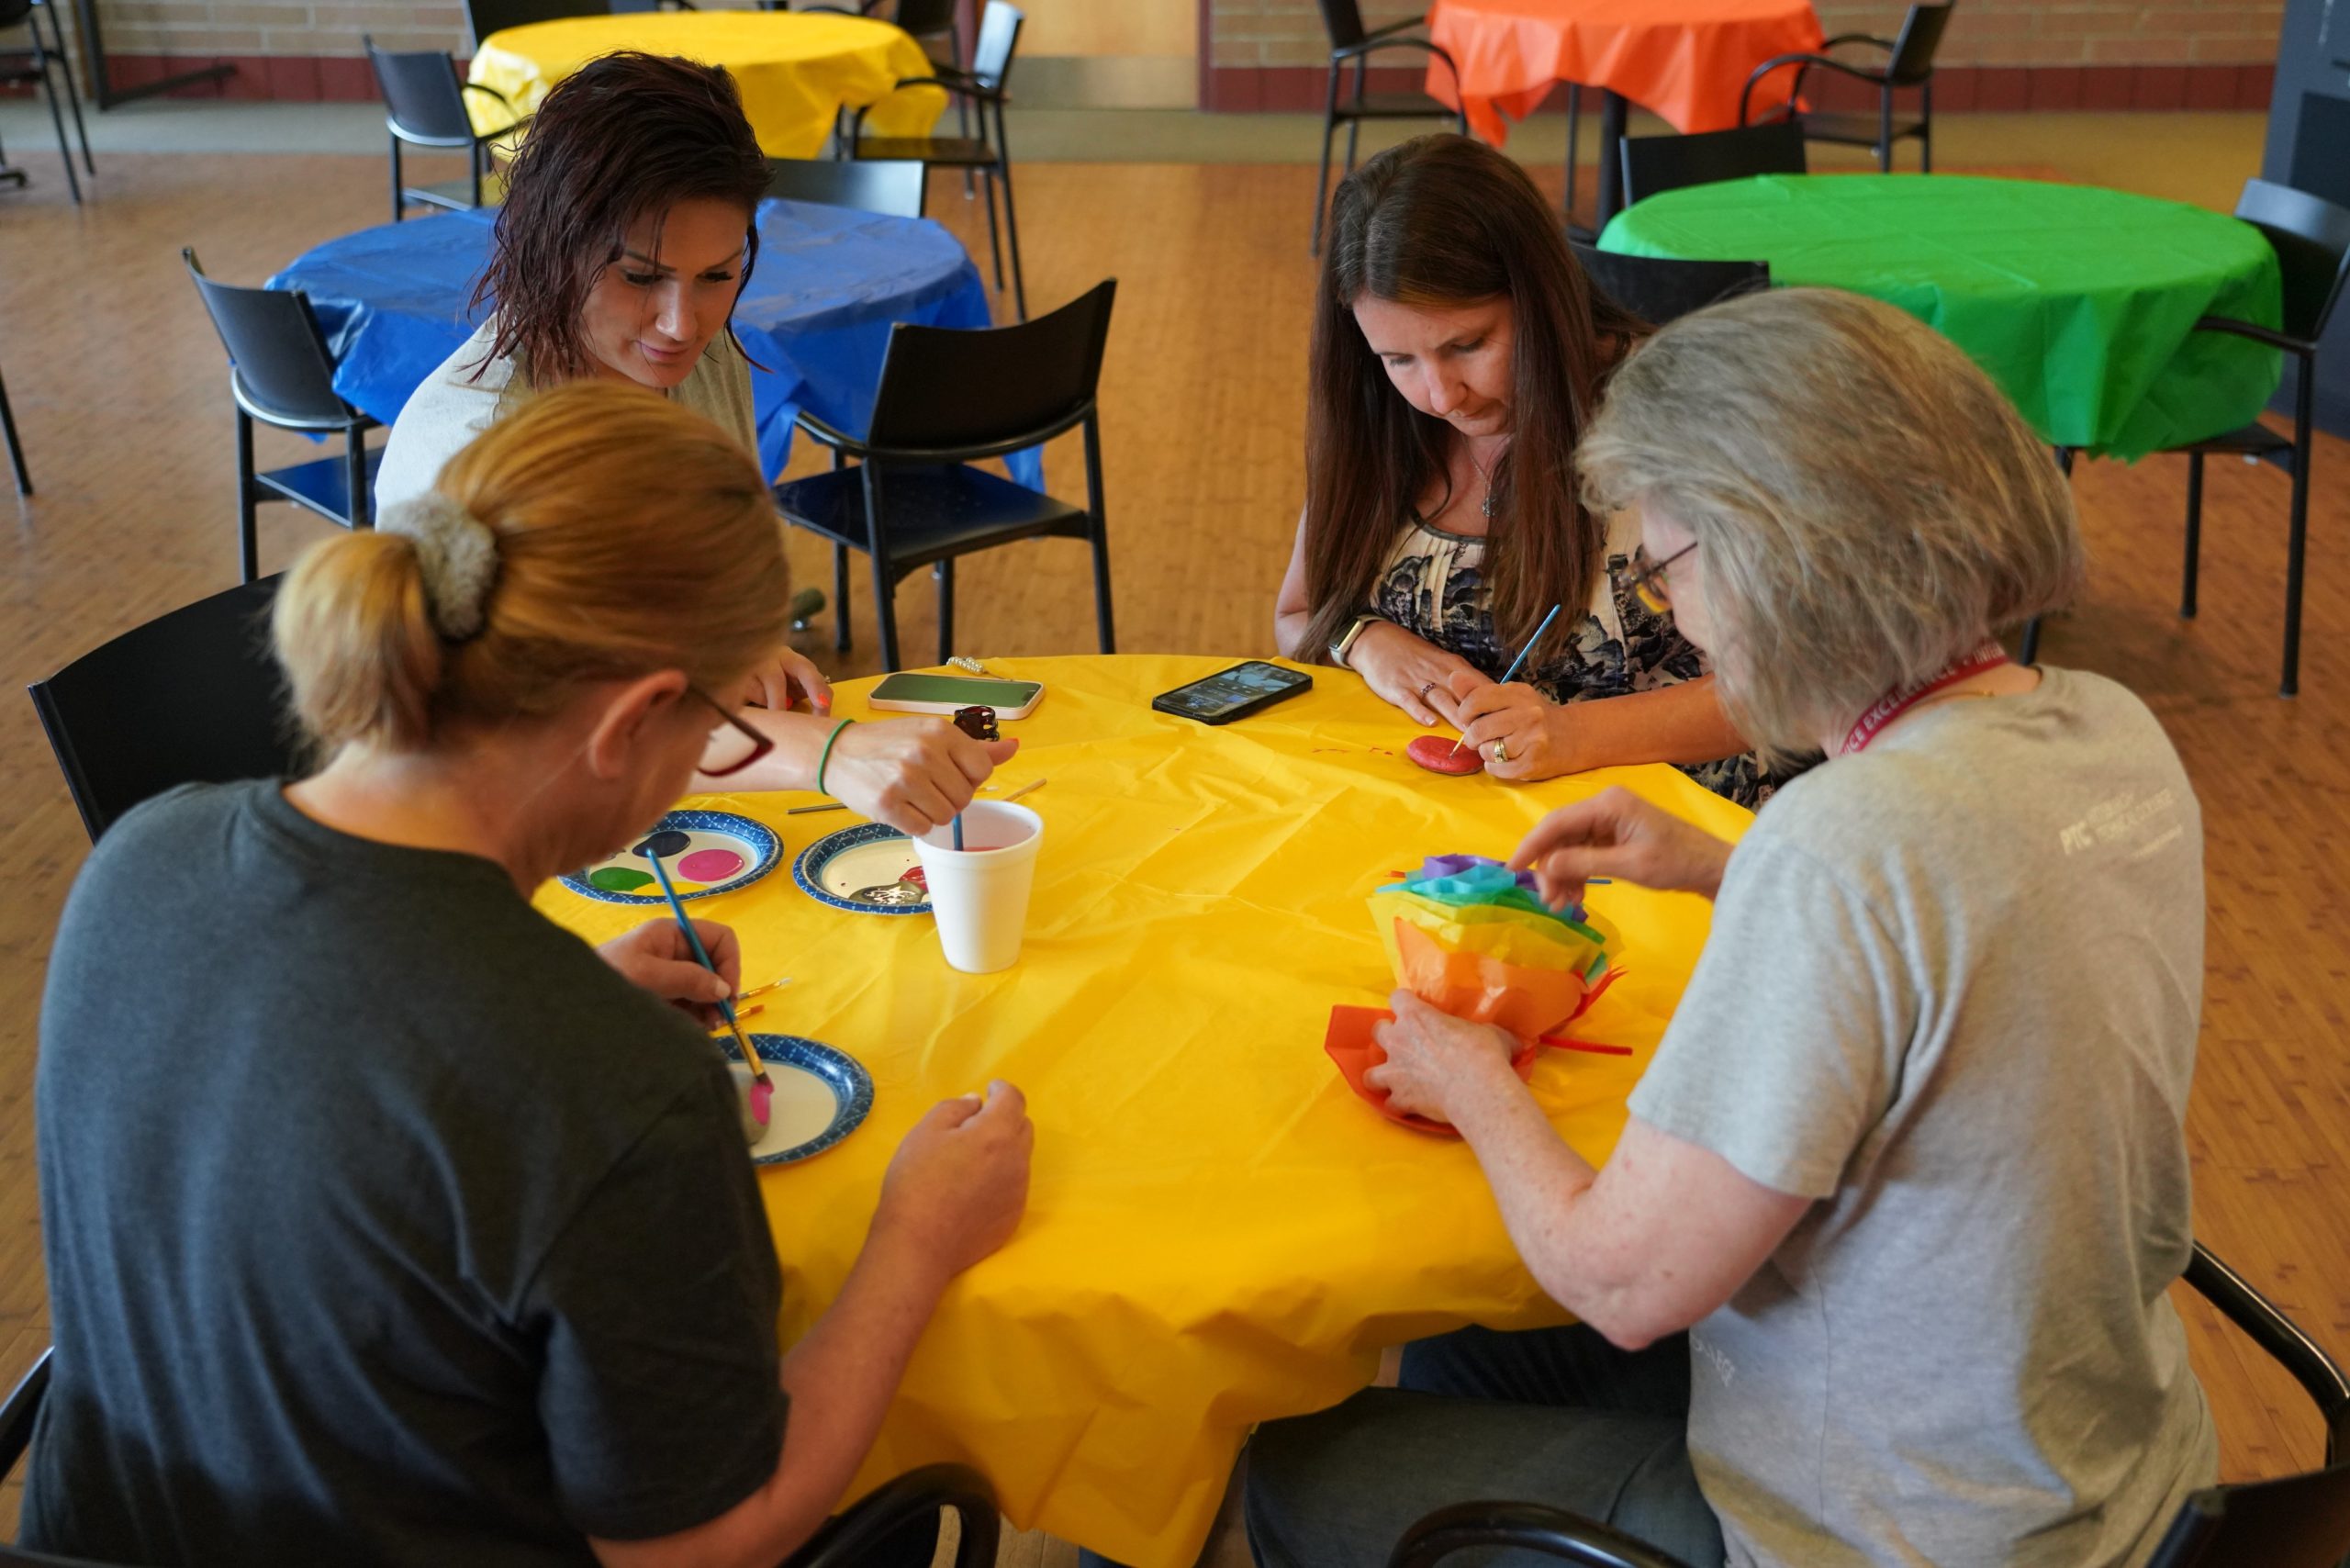 Faculty & Staff enjoying working on crafts for the crafternoon event.